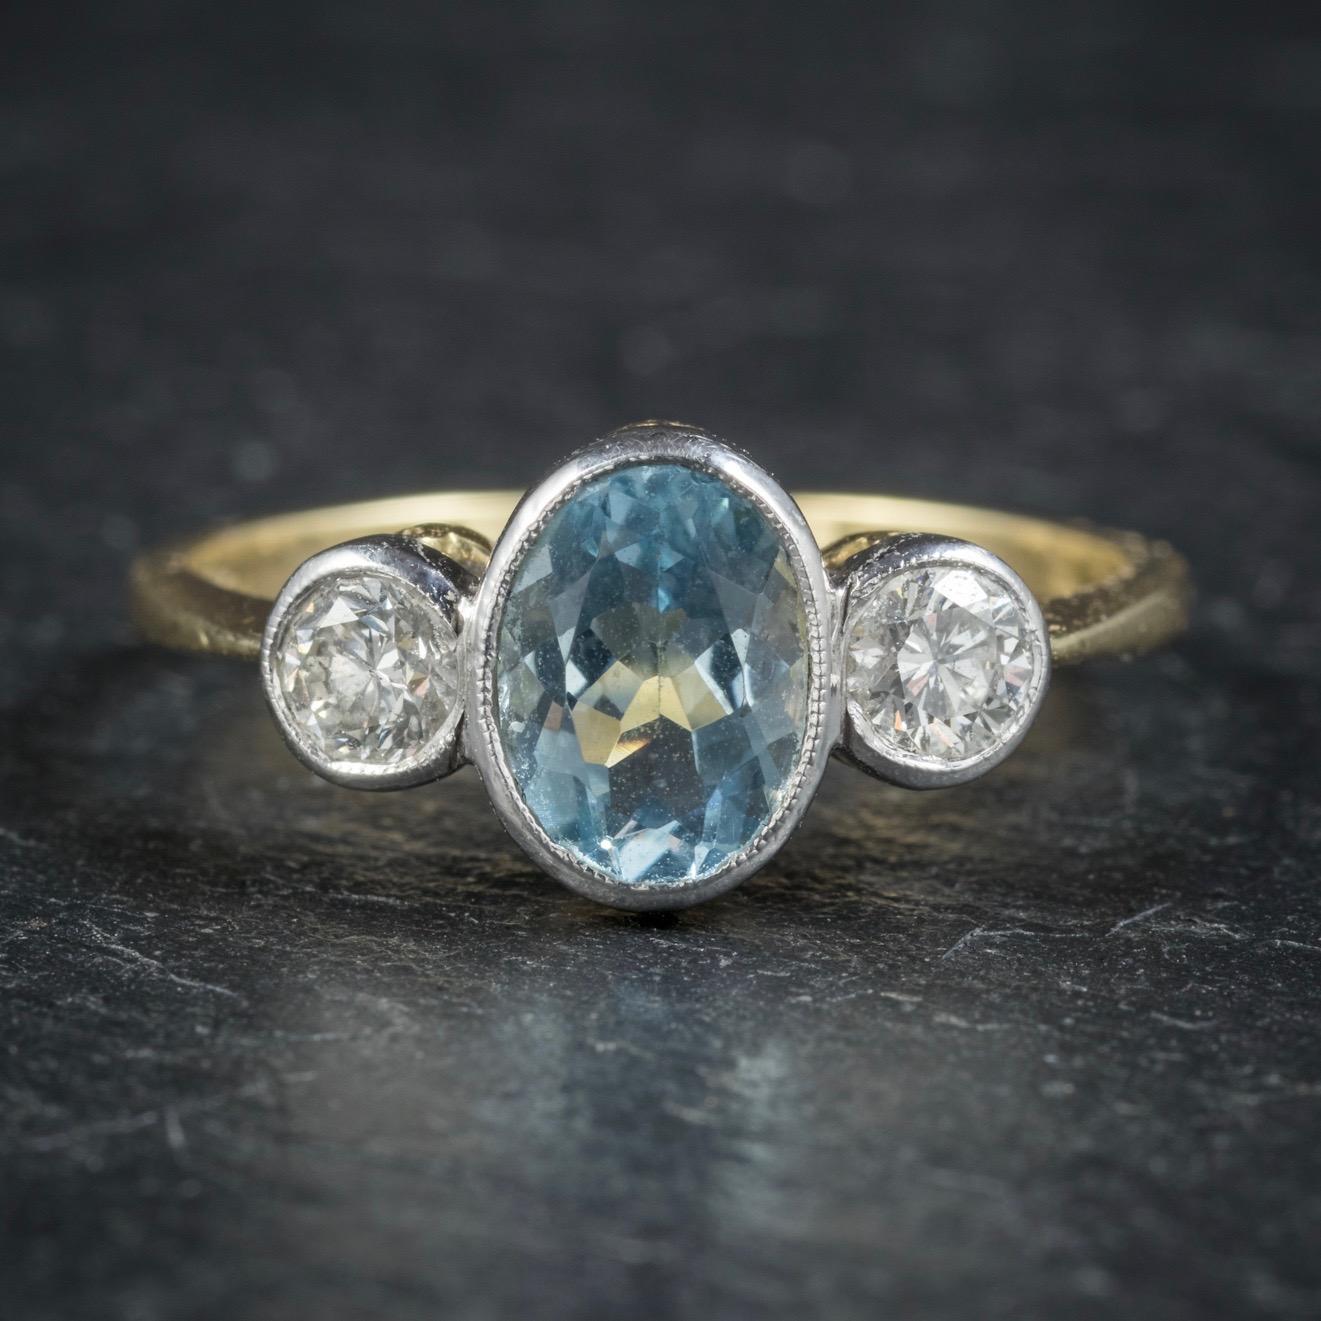 This classy antique Aquamarine and Diamond trilogy ring is Edwardian, Circa 1910.

The lovely ocean blue Aquamarine is 1.50ct with a 0.20ct old cut Diamond at either side. 

All set in an 18ct White Gold gallery with a Yellow Gold shank which is